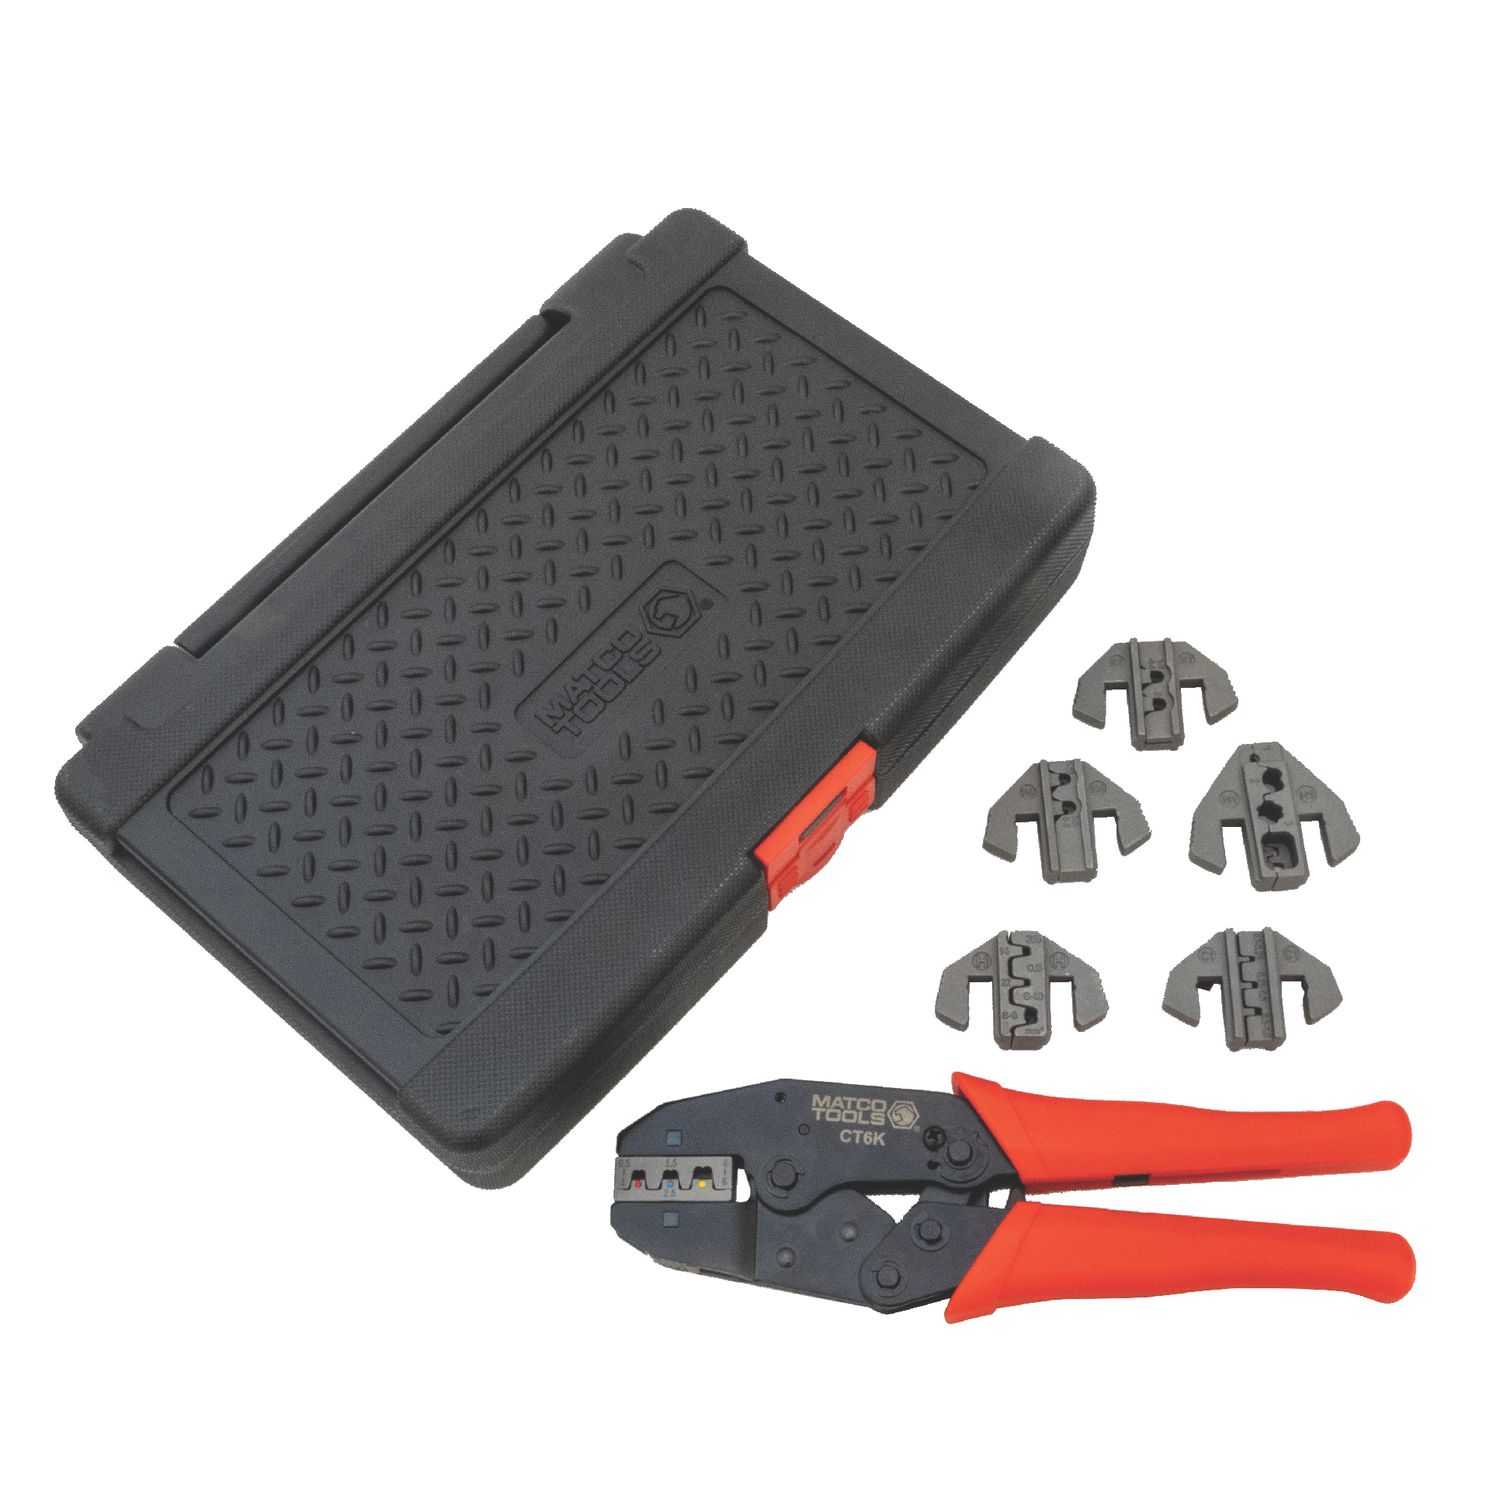 INTERCHANGEABLE CRIMPING TOOL KIT WITH 6 INTERCHANGEABLE DIES CT6K